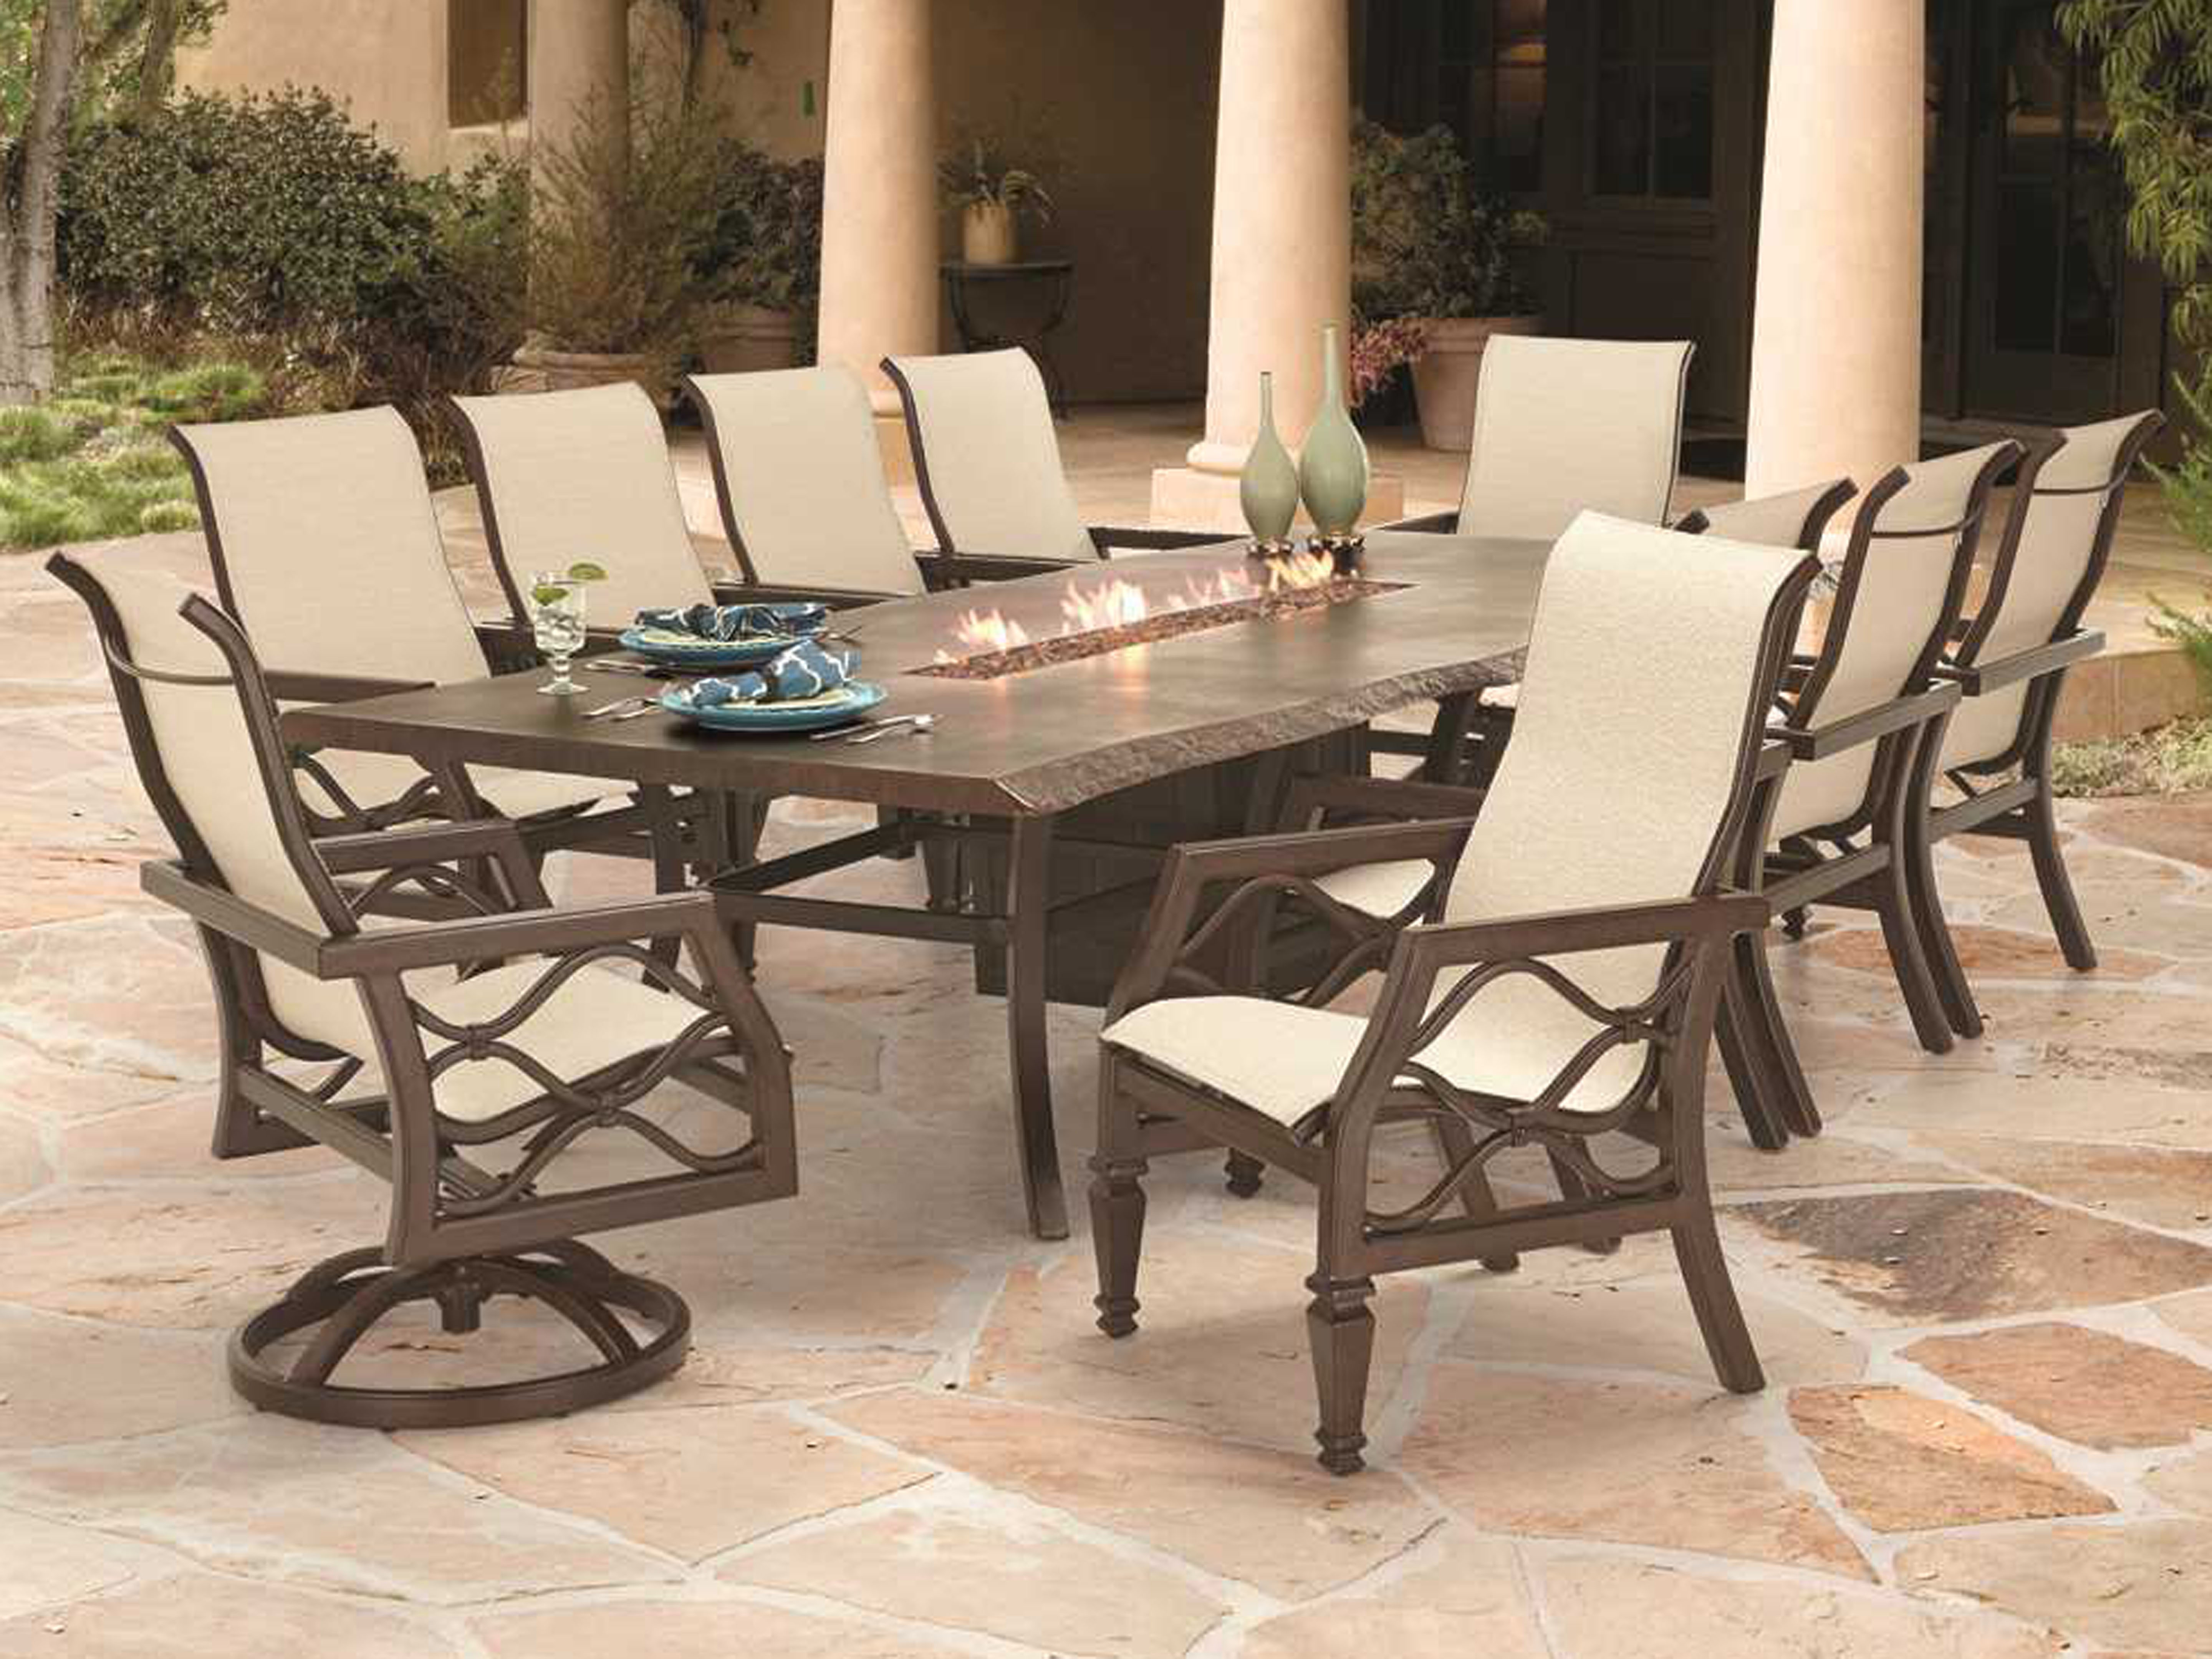 Castelle Villa Bianca Sling Cast, Outdoor Dining Table With Fire Pit In The Middle